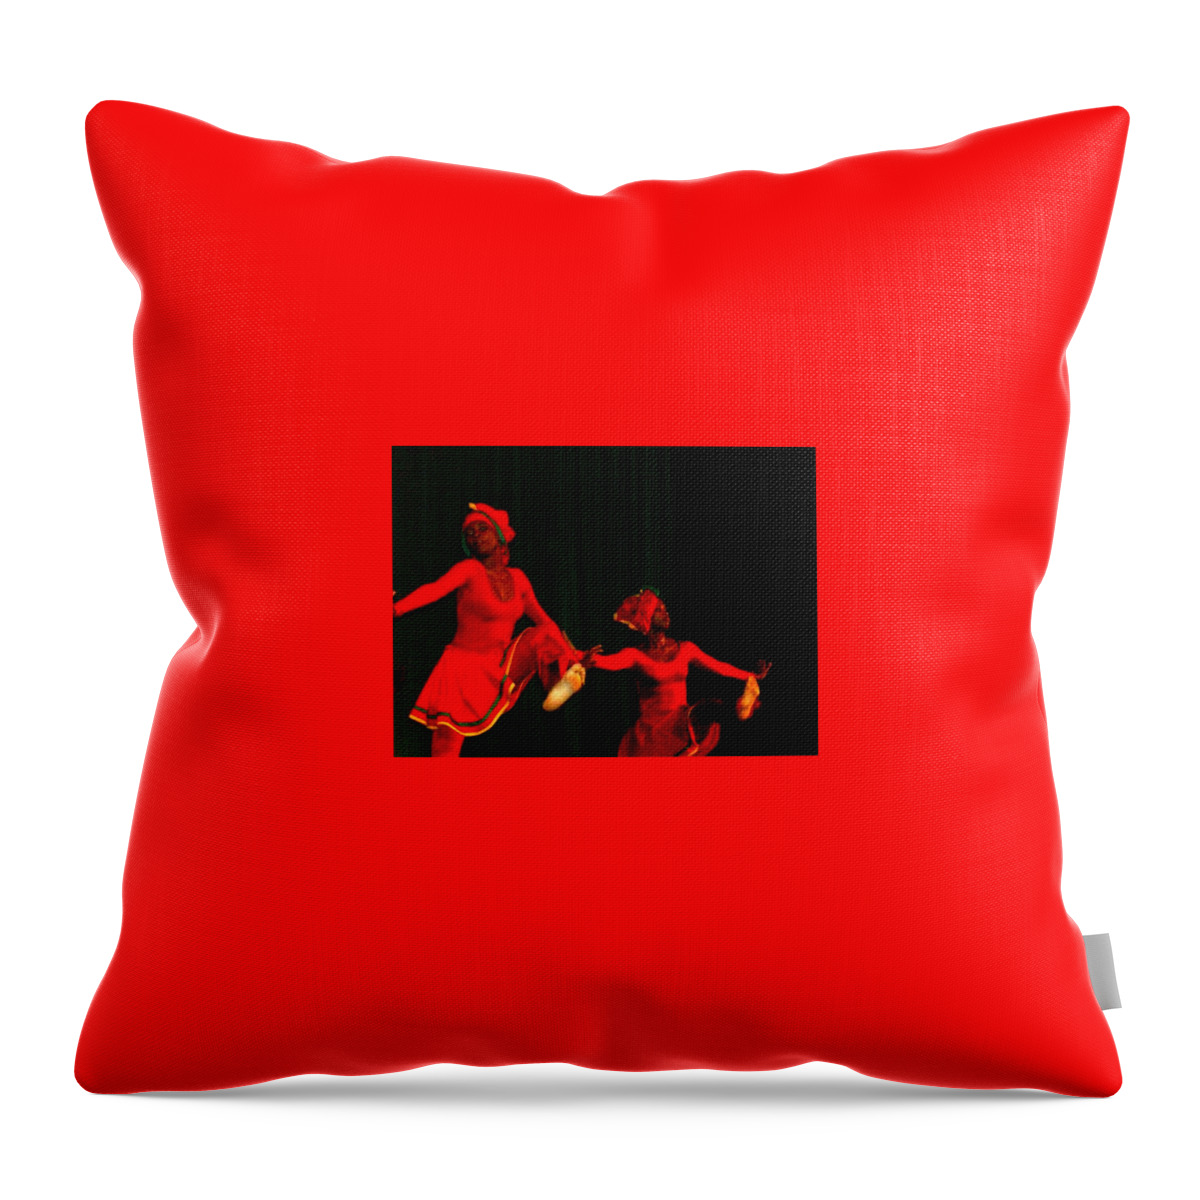 Tivoli Dance Troop Throw Pillow featuring the photograph Fire Walkers by Trevor A Smith